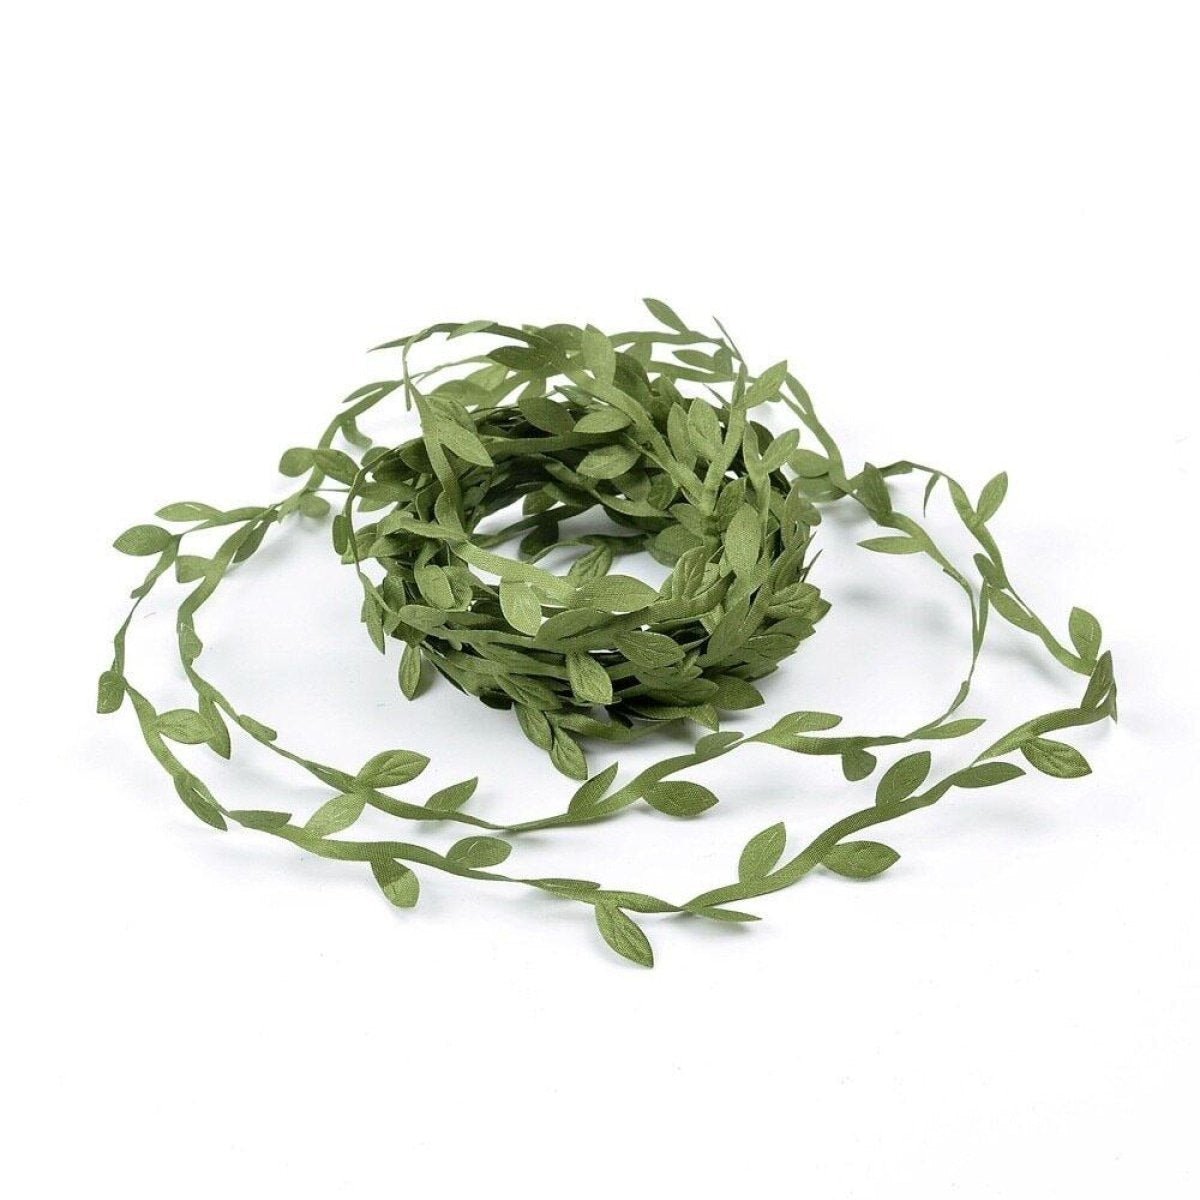 5m/10m Artificial Vine Leaves Wedding Wreath Decorations Rope DIY Craft - 5M Green - - Asia Sell